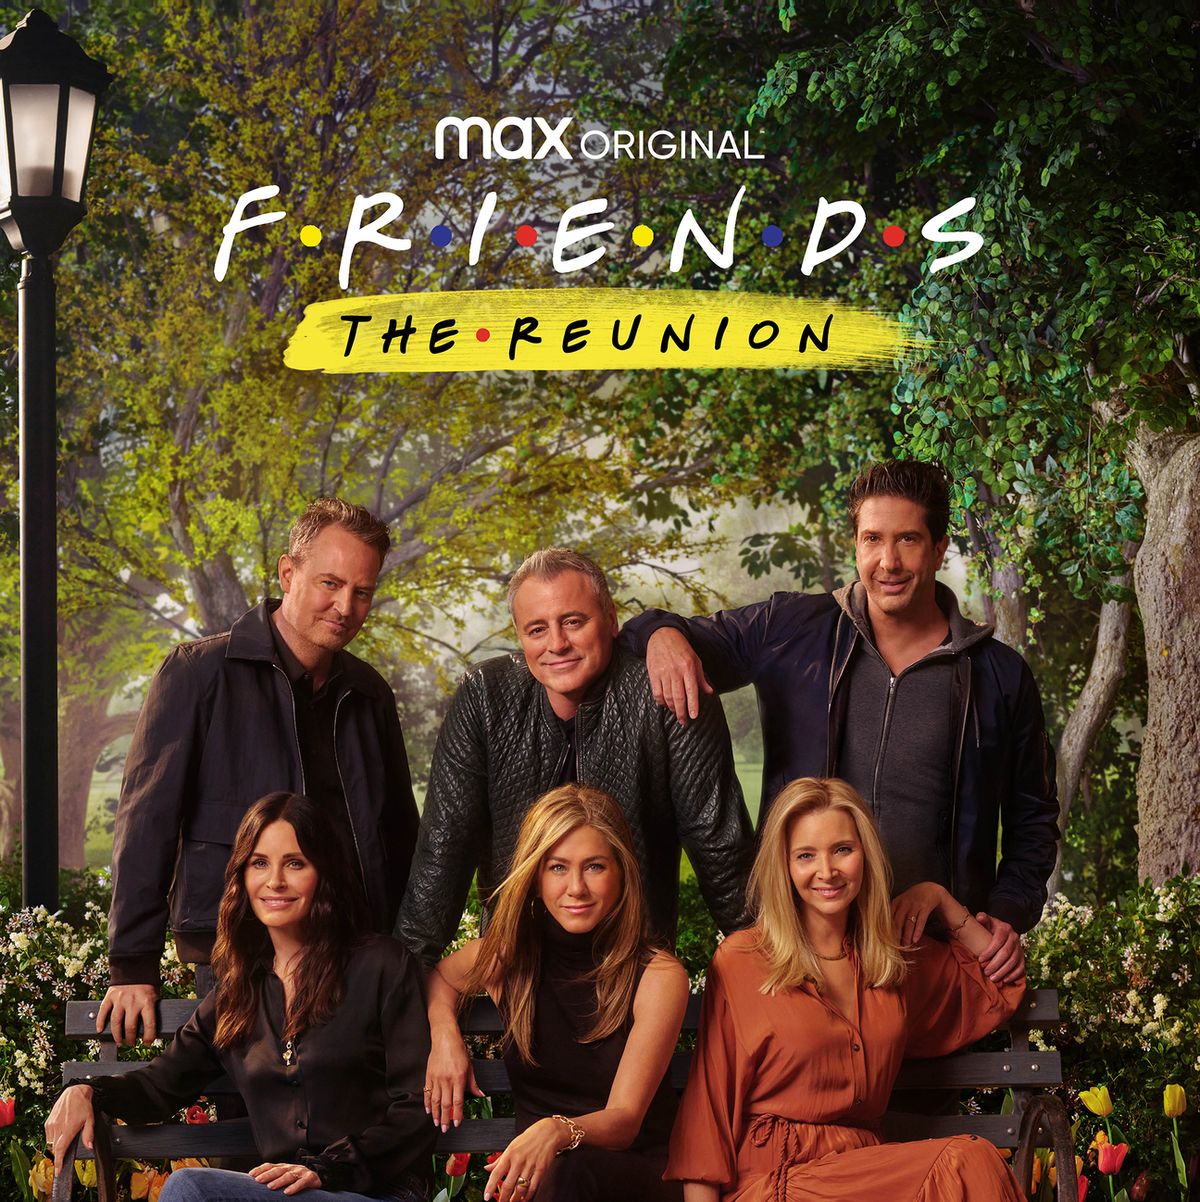 Here's How to Watch 'Friends' on Streaming Platforms